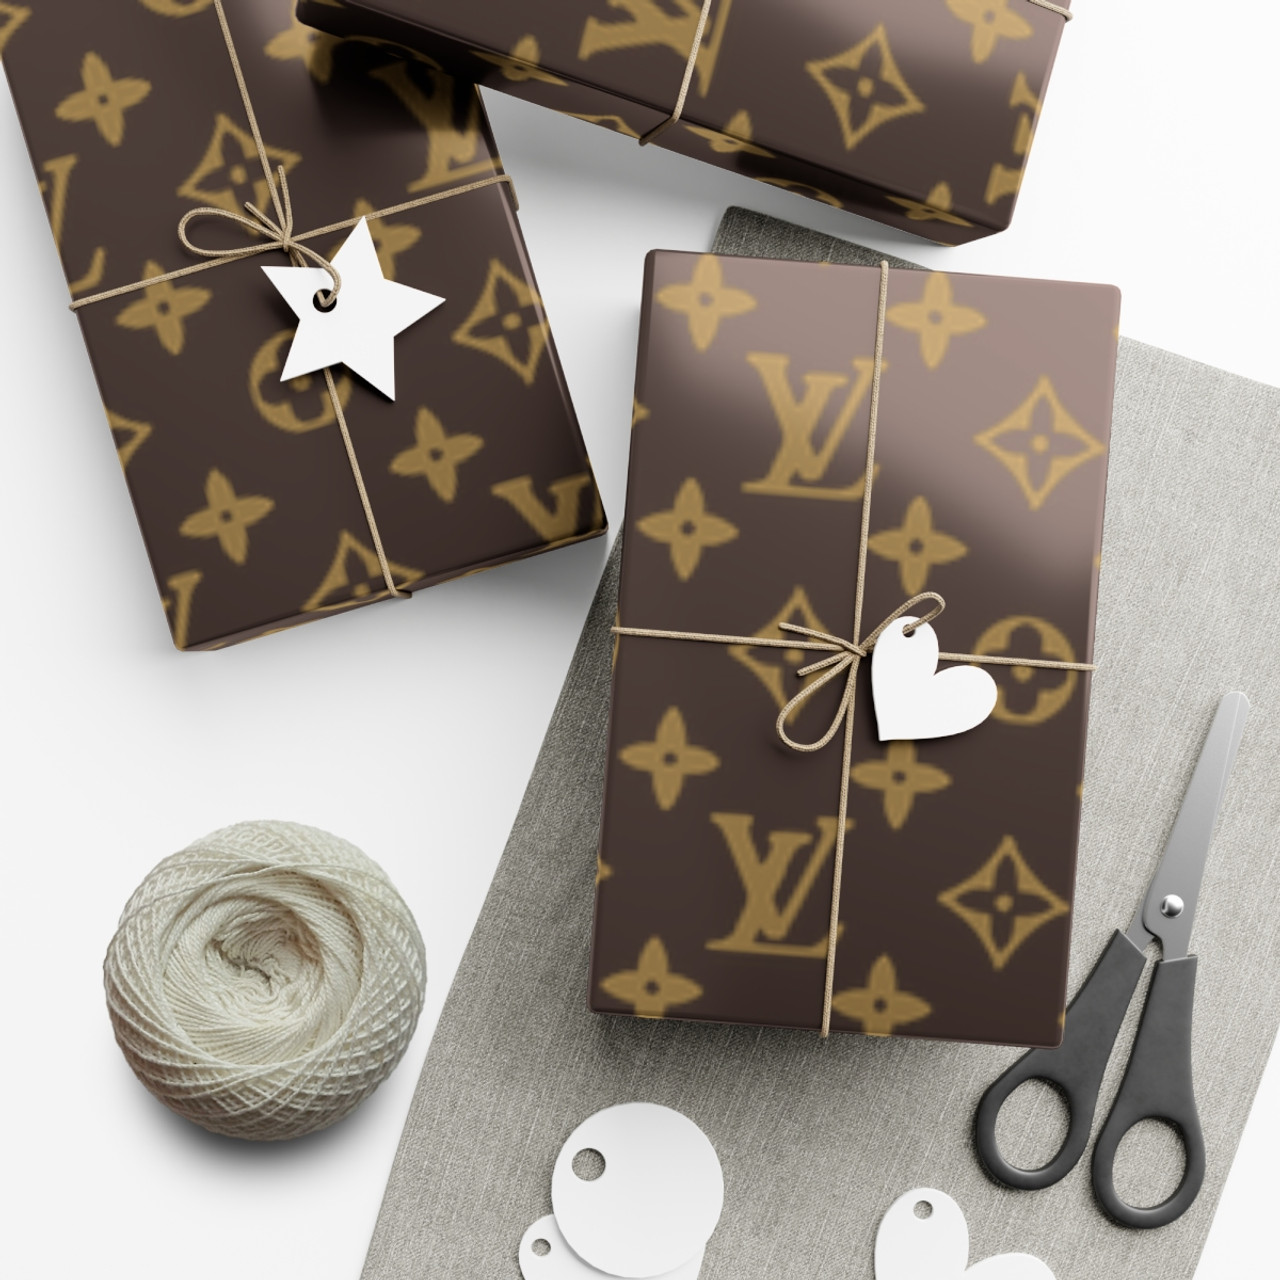 where to sell louis vuitton wrapping paper in dallas｜TikTok Search